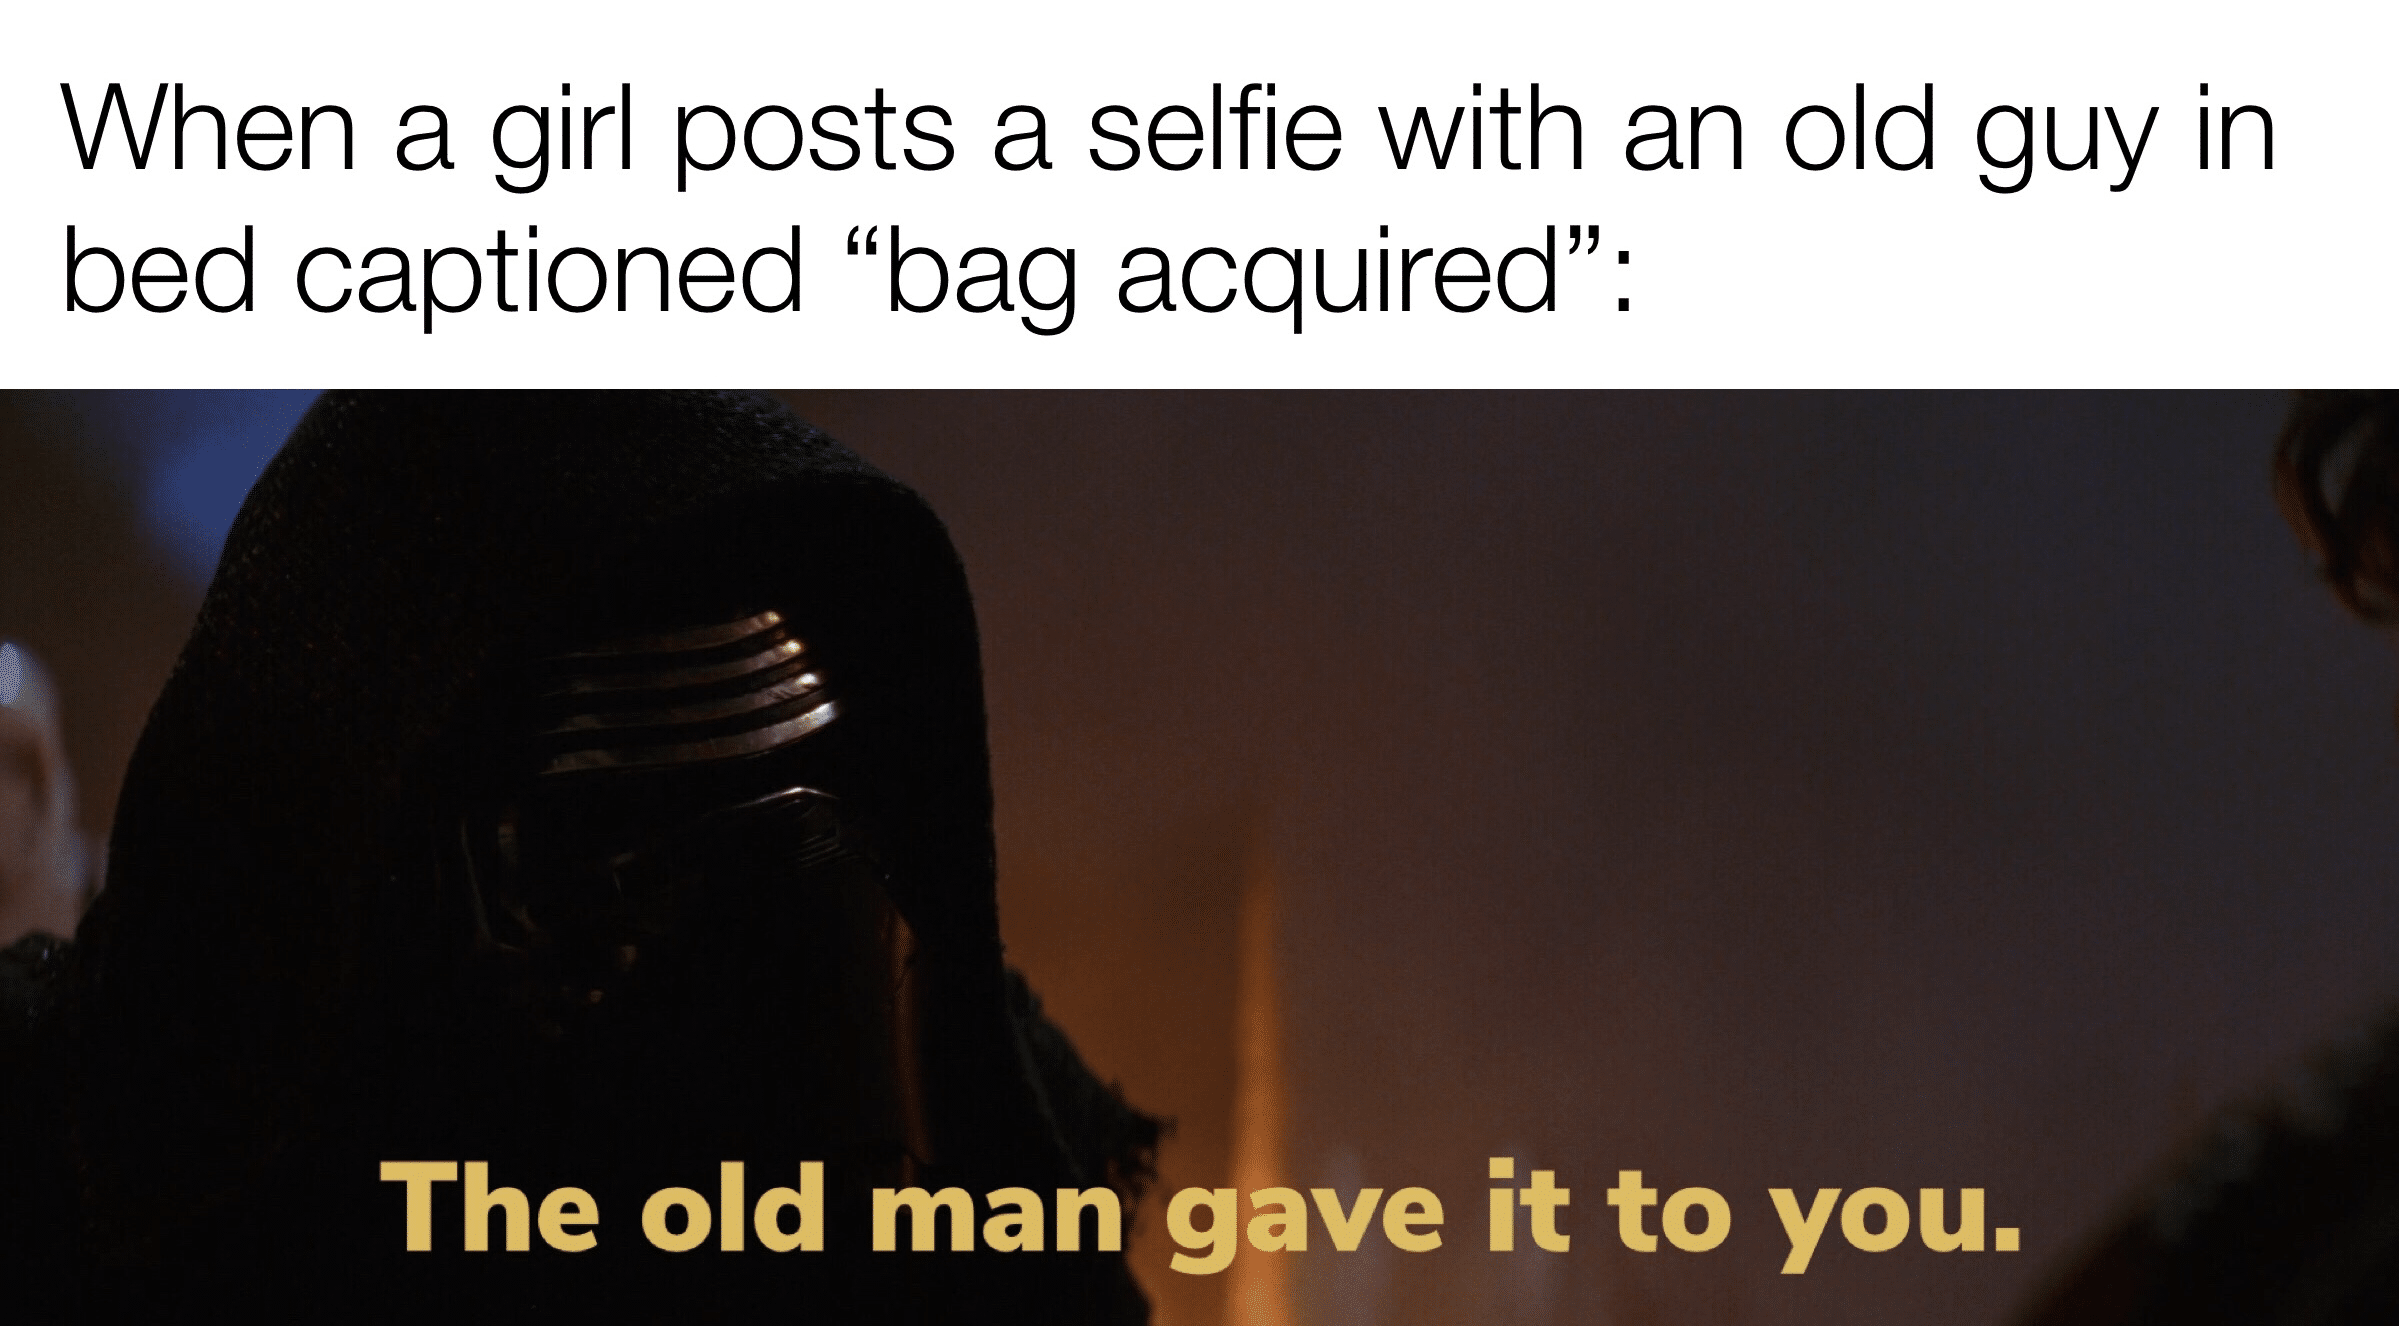 sequel-memes star-wars-memes sequel-memes text: When a girl posts a selfie with an old guy in bed captioned 